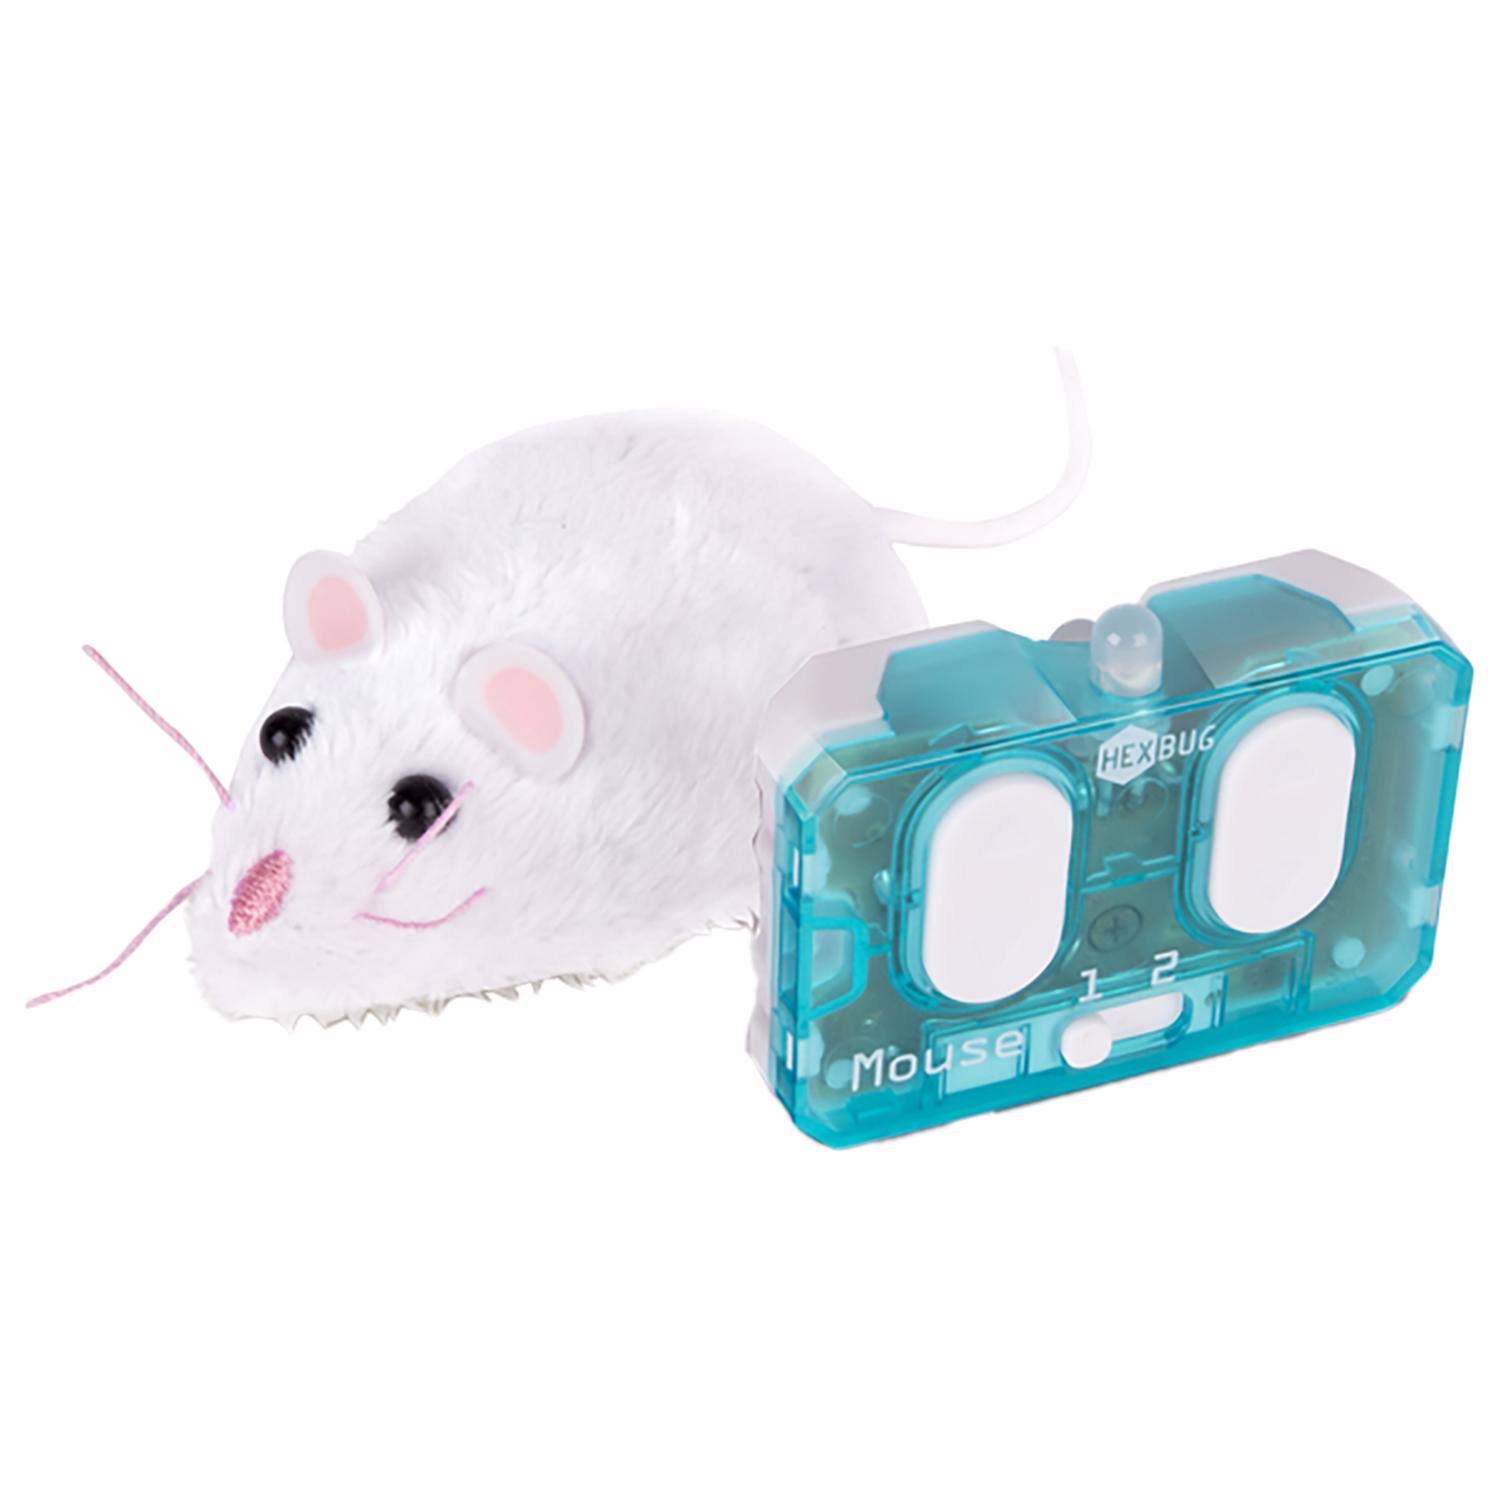 HEXBUG REMOTE CONTROL MOUSE ROBOTIC CAT TOY